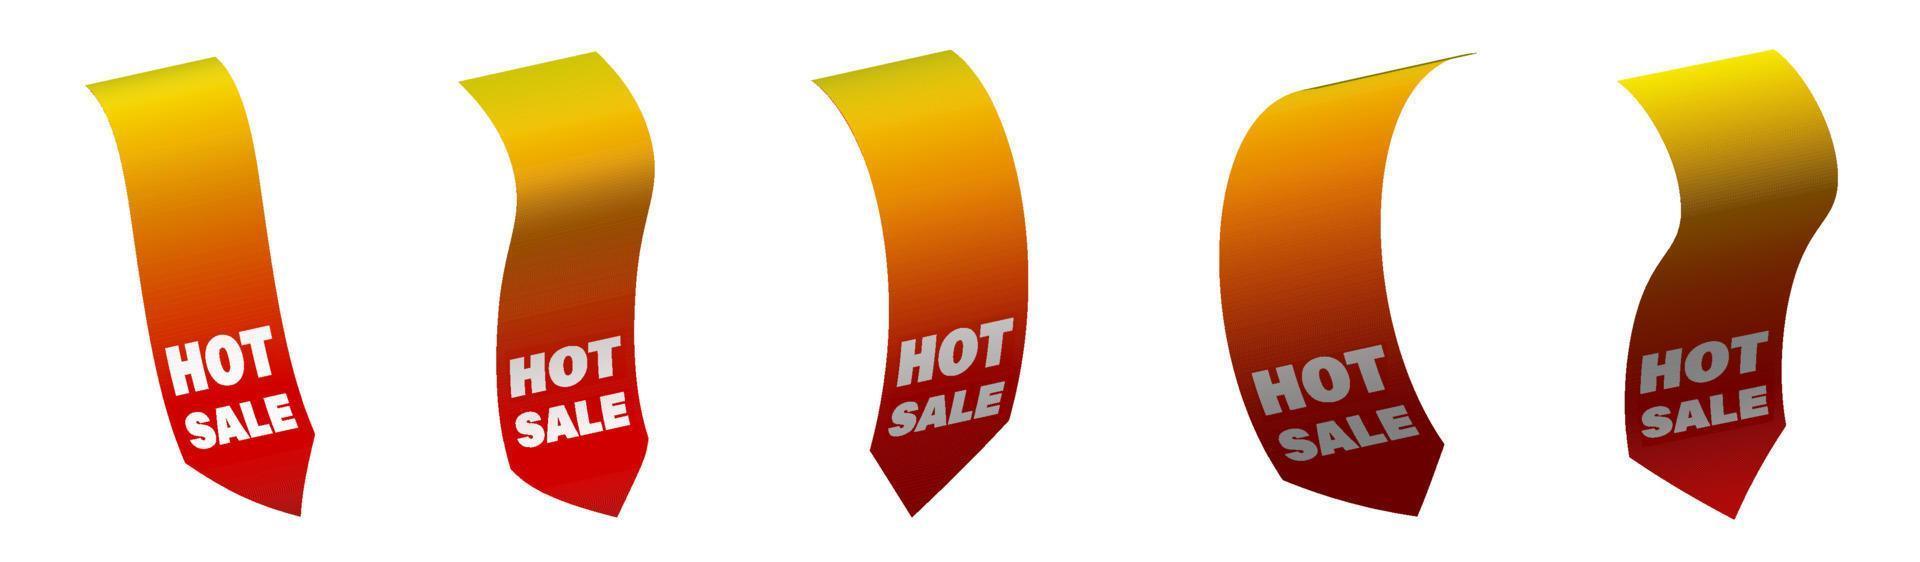 Set of summer price tags for the sale of hot fiery color. Ribbon sale banners isolated on white background. New collection of offers in vector